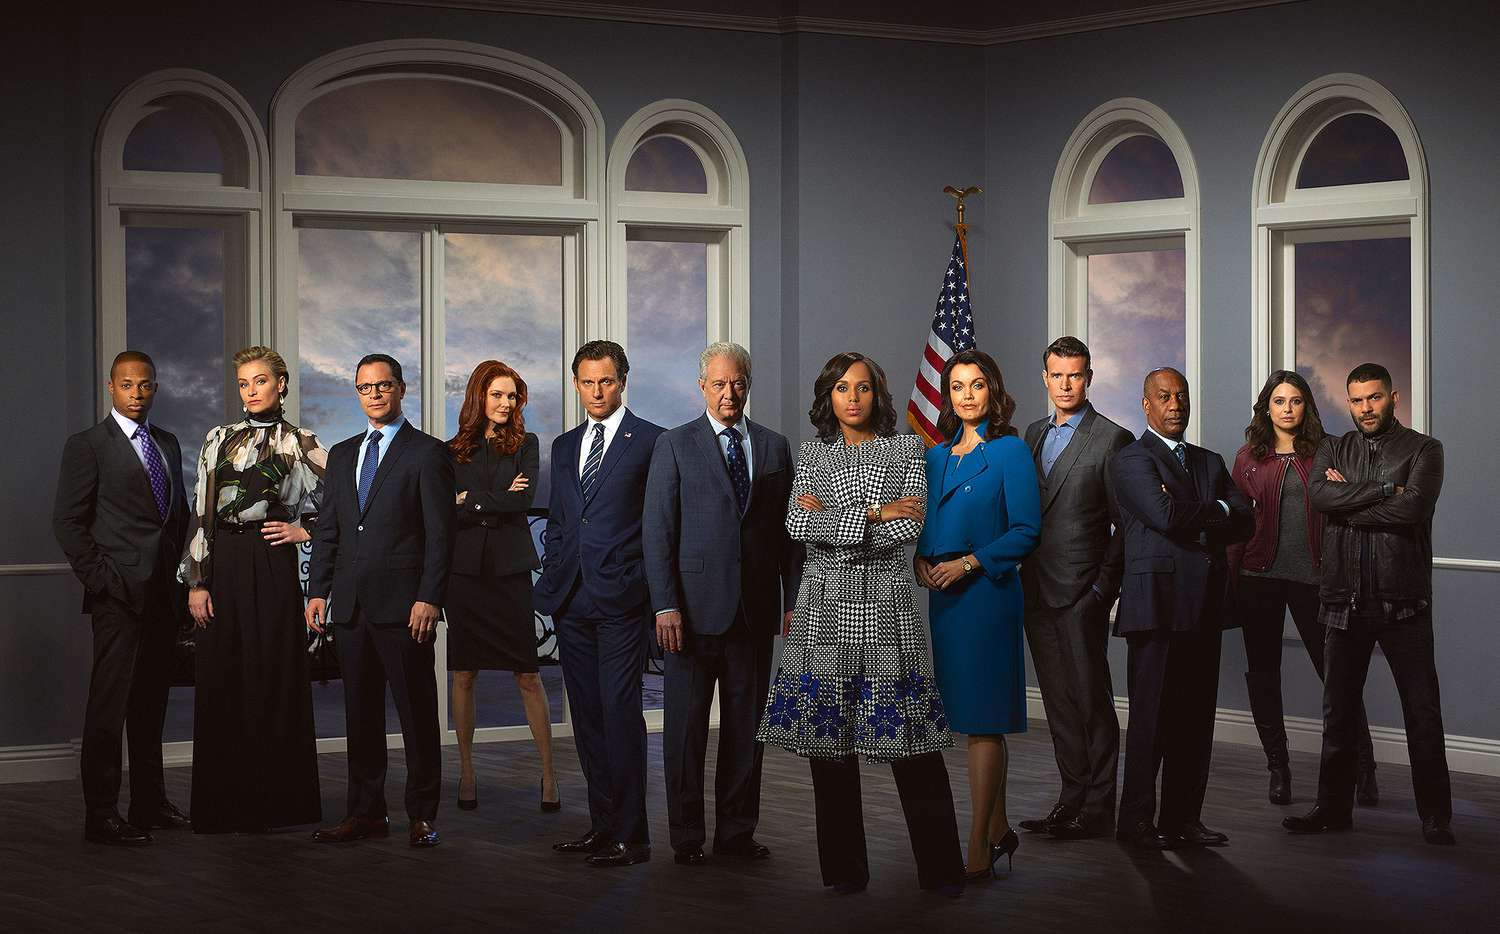 dhan opena recommends Scandal Episode 1 Cast